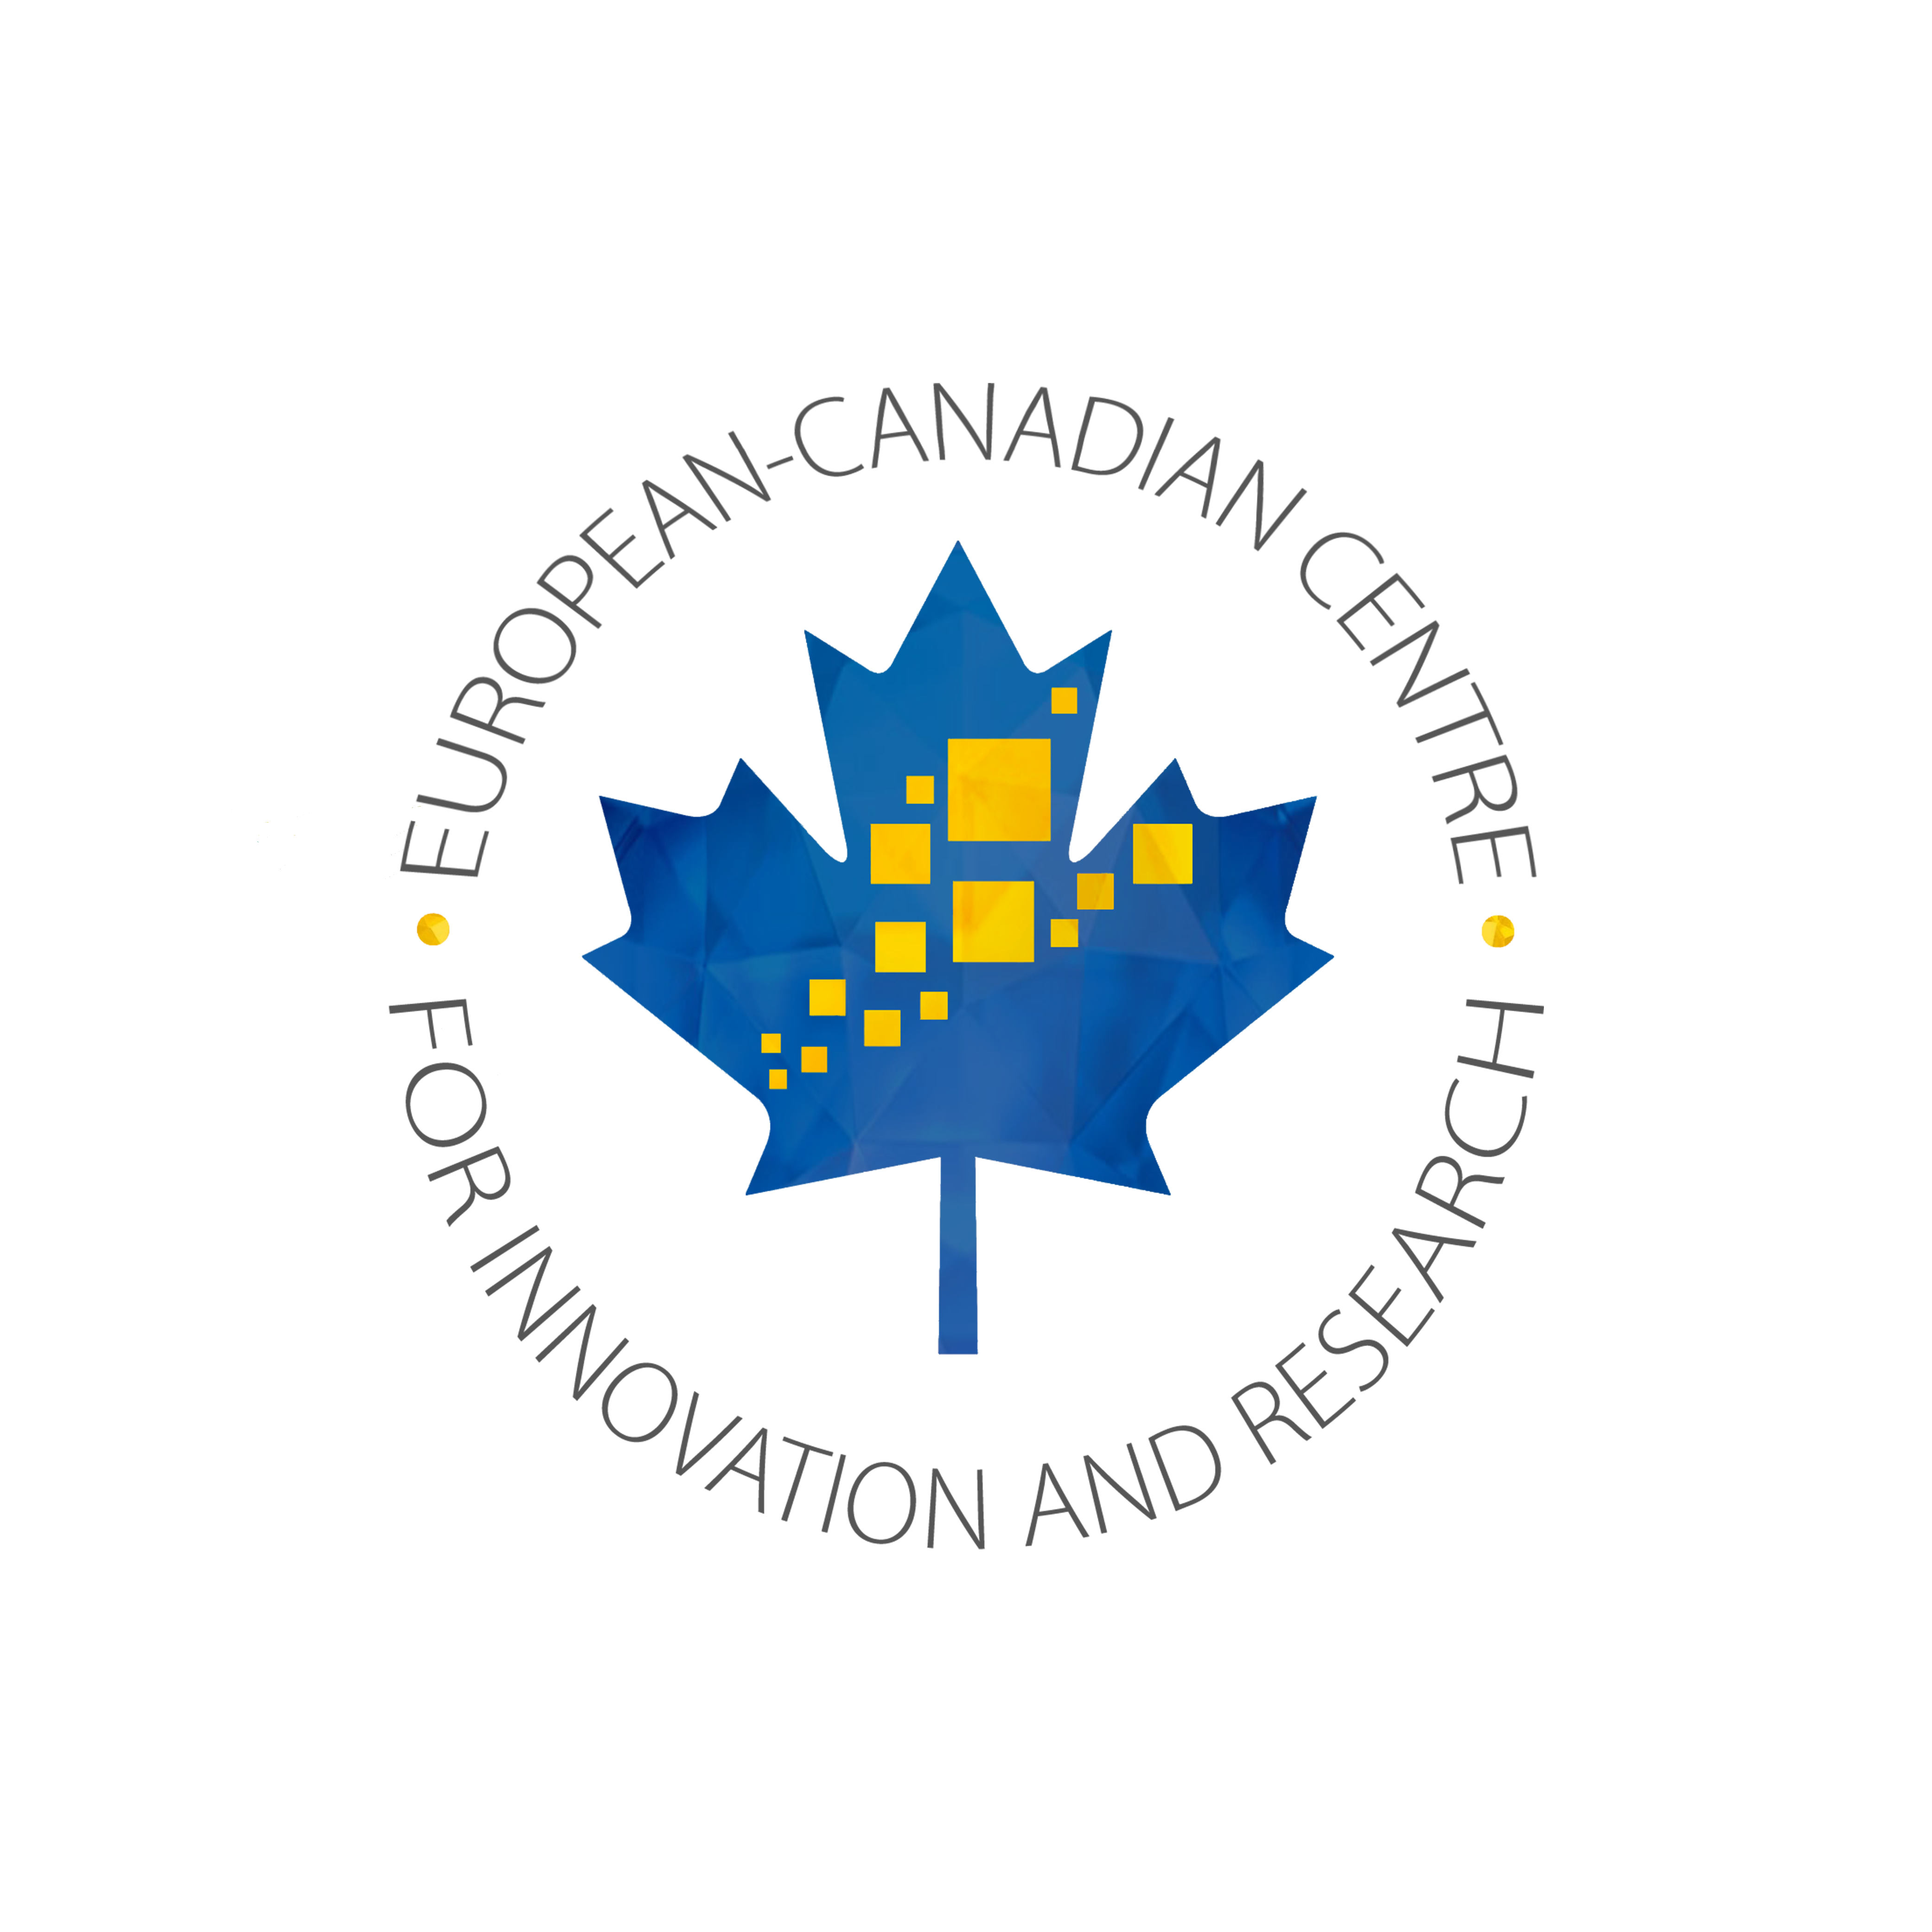 Canadian Maple Leaf with Swedish colours (blue & yellow) with European Canadian Centre for Innovation & Research in a circle around it